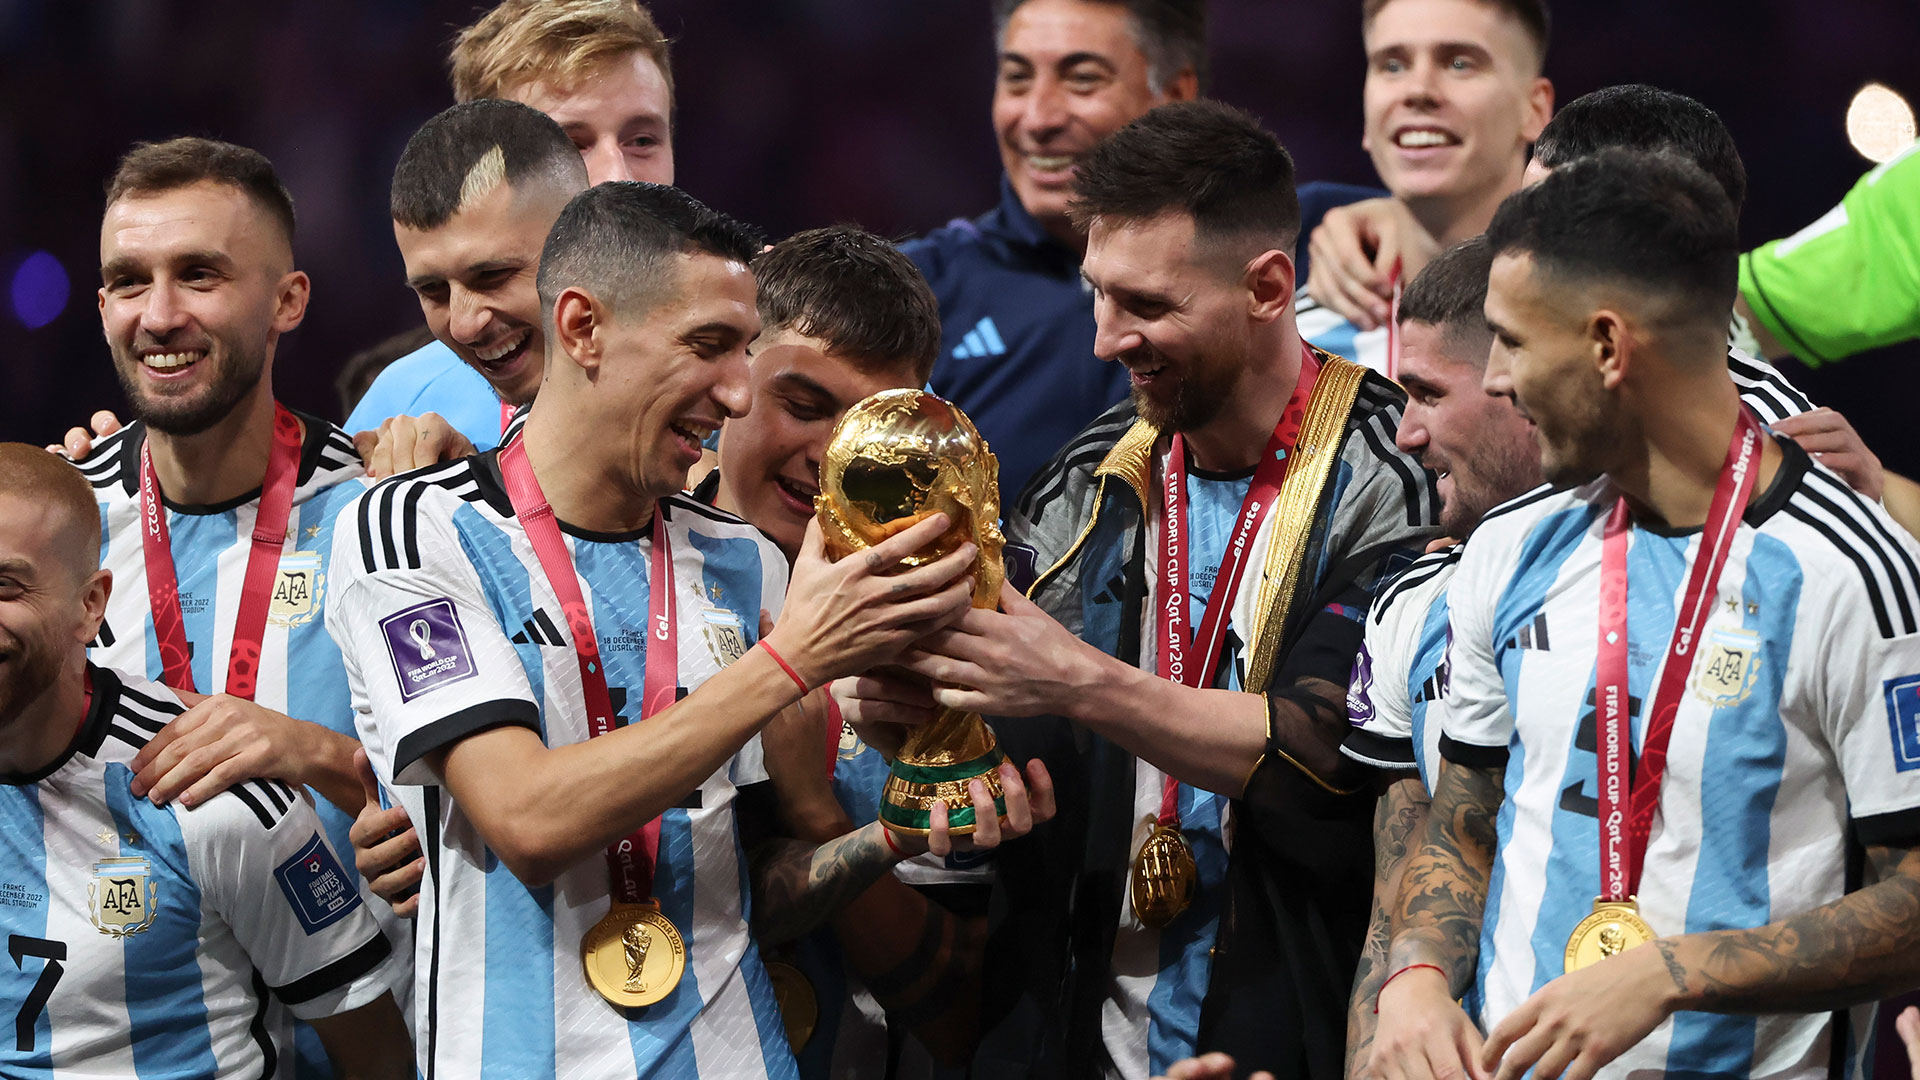 Angel Di Maria and Lionel Messi hold the cup during the closing ceremony of the World Cup in Qatar after winning the final in Lusail on December 18, 2022 (Photo by Jean Catuffe/Getty Images)